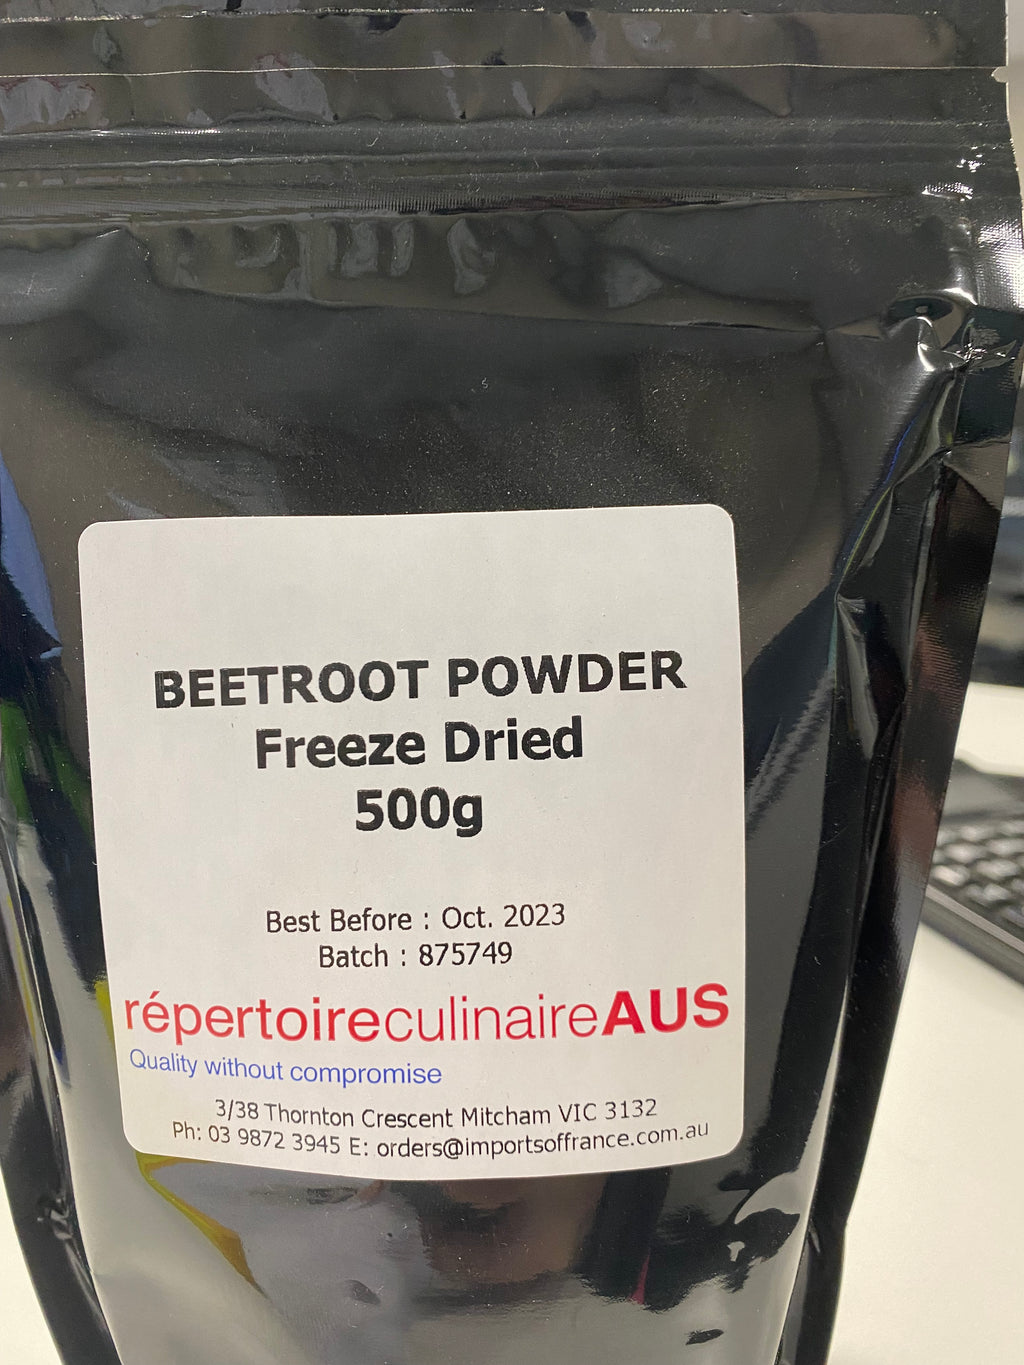 Freeze Dried Beetroot Powder 500g Repertoire Culinaire